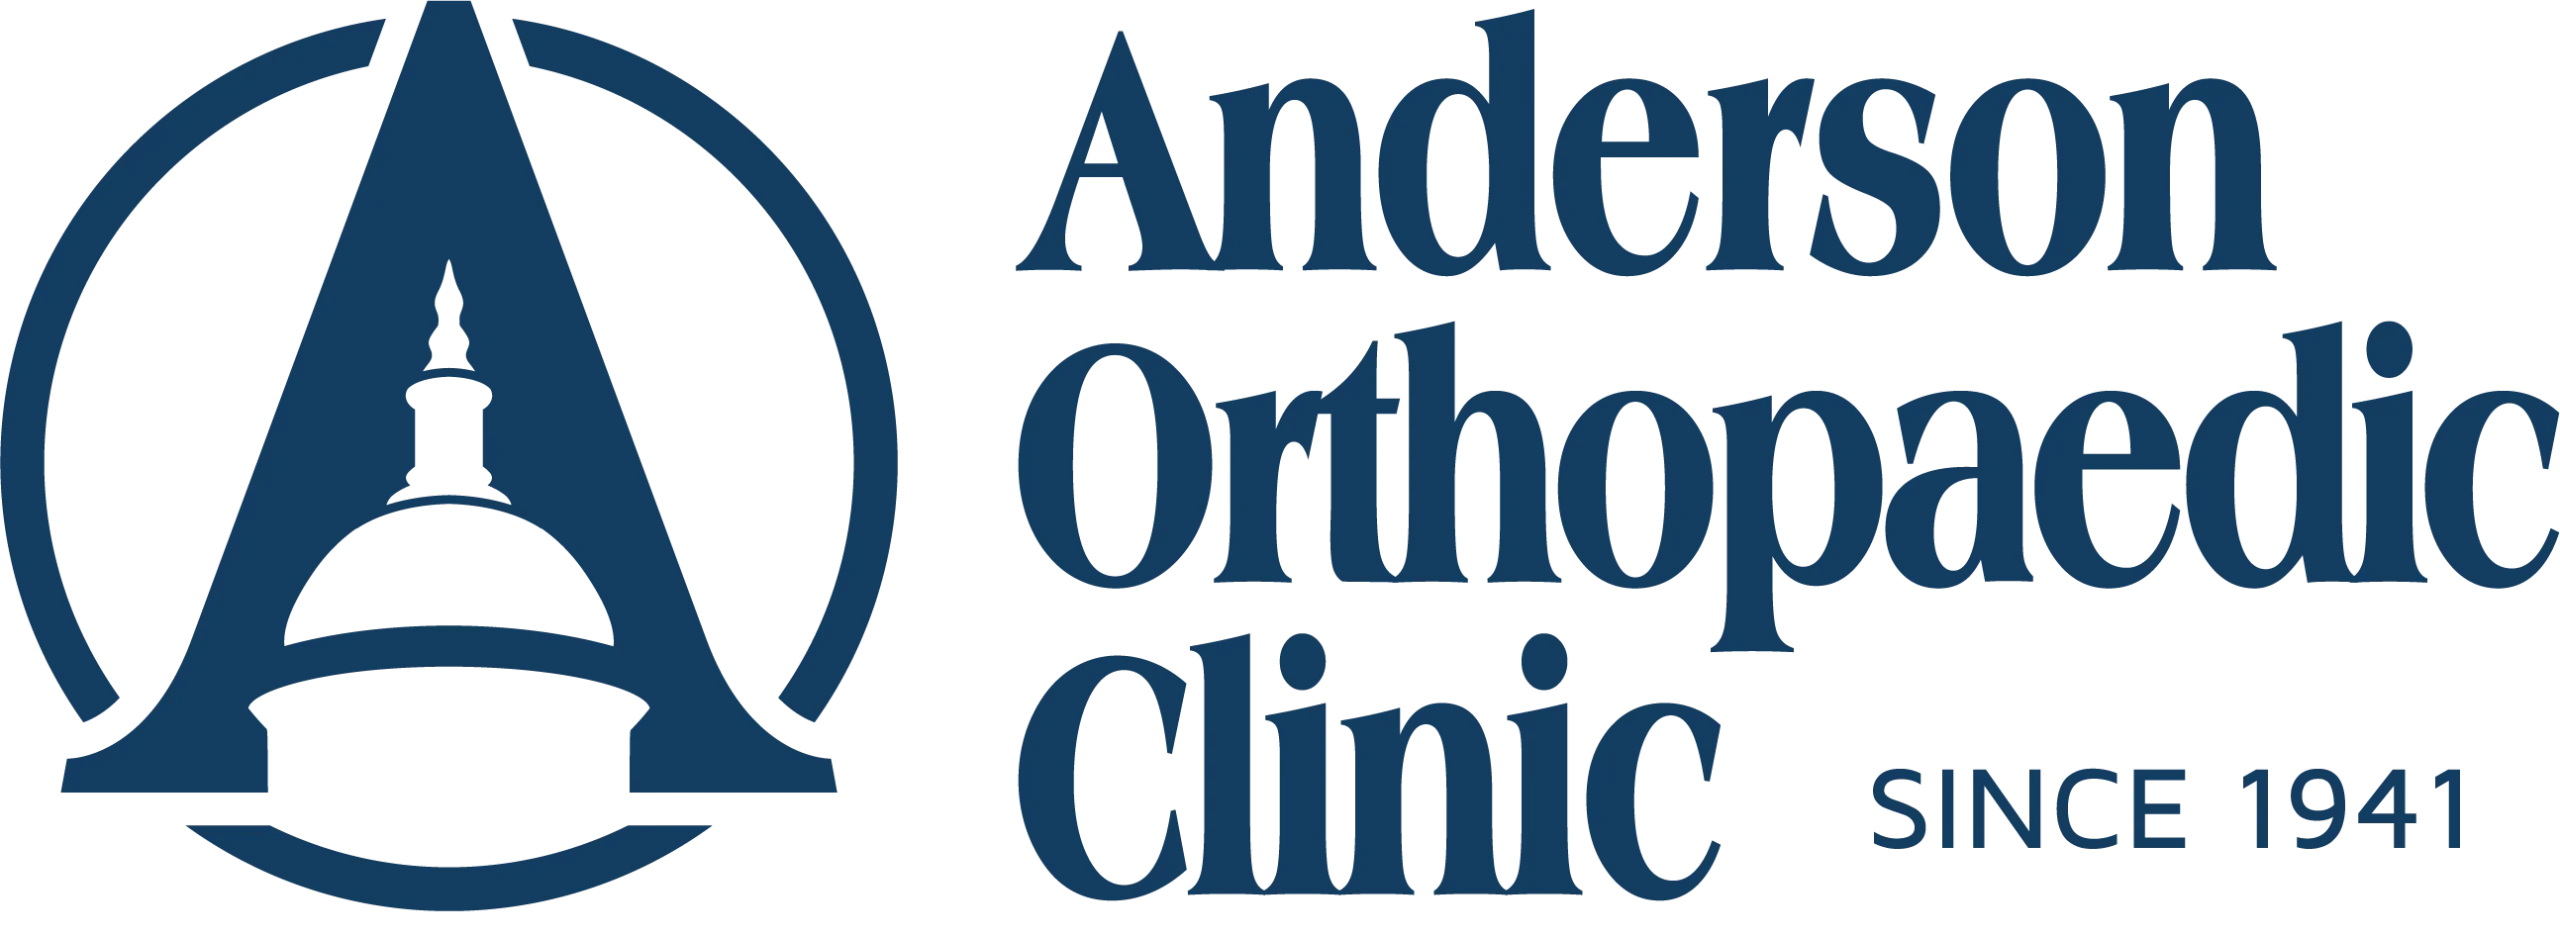 Anderson Orthopaetic Clinics